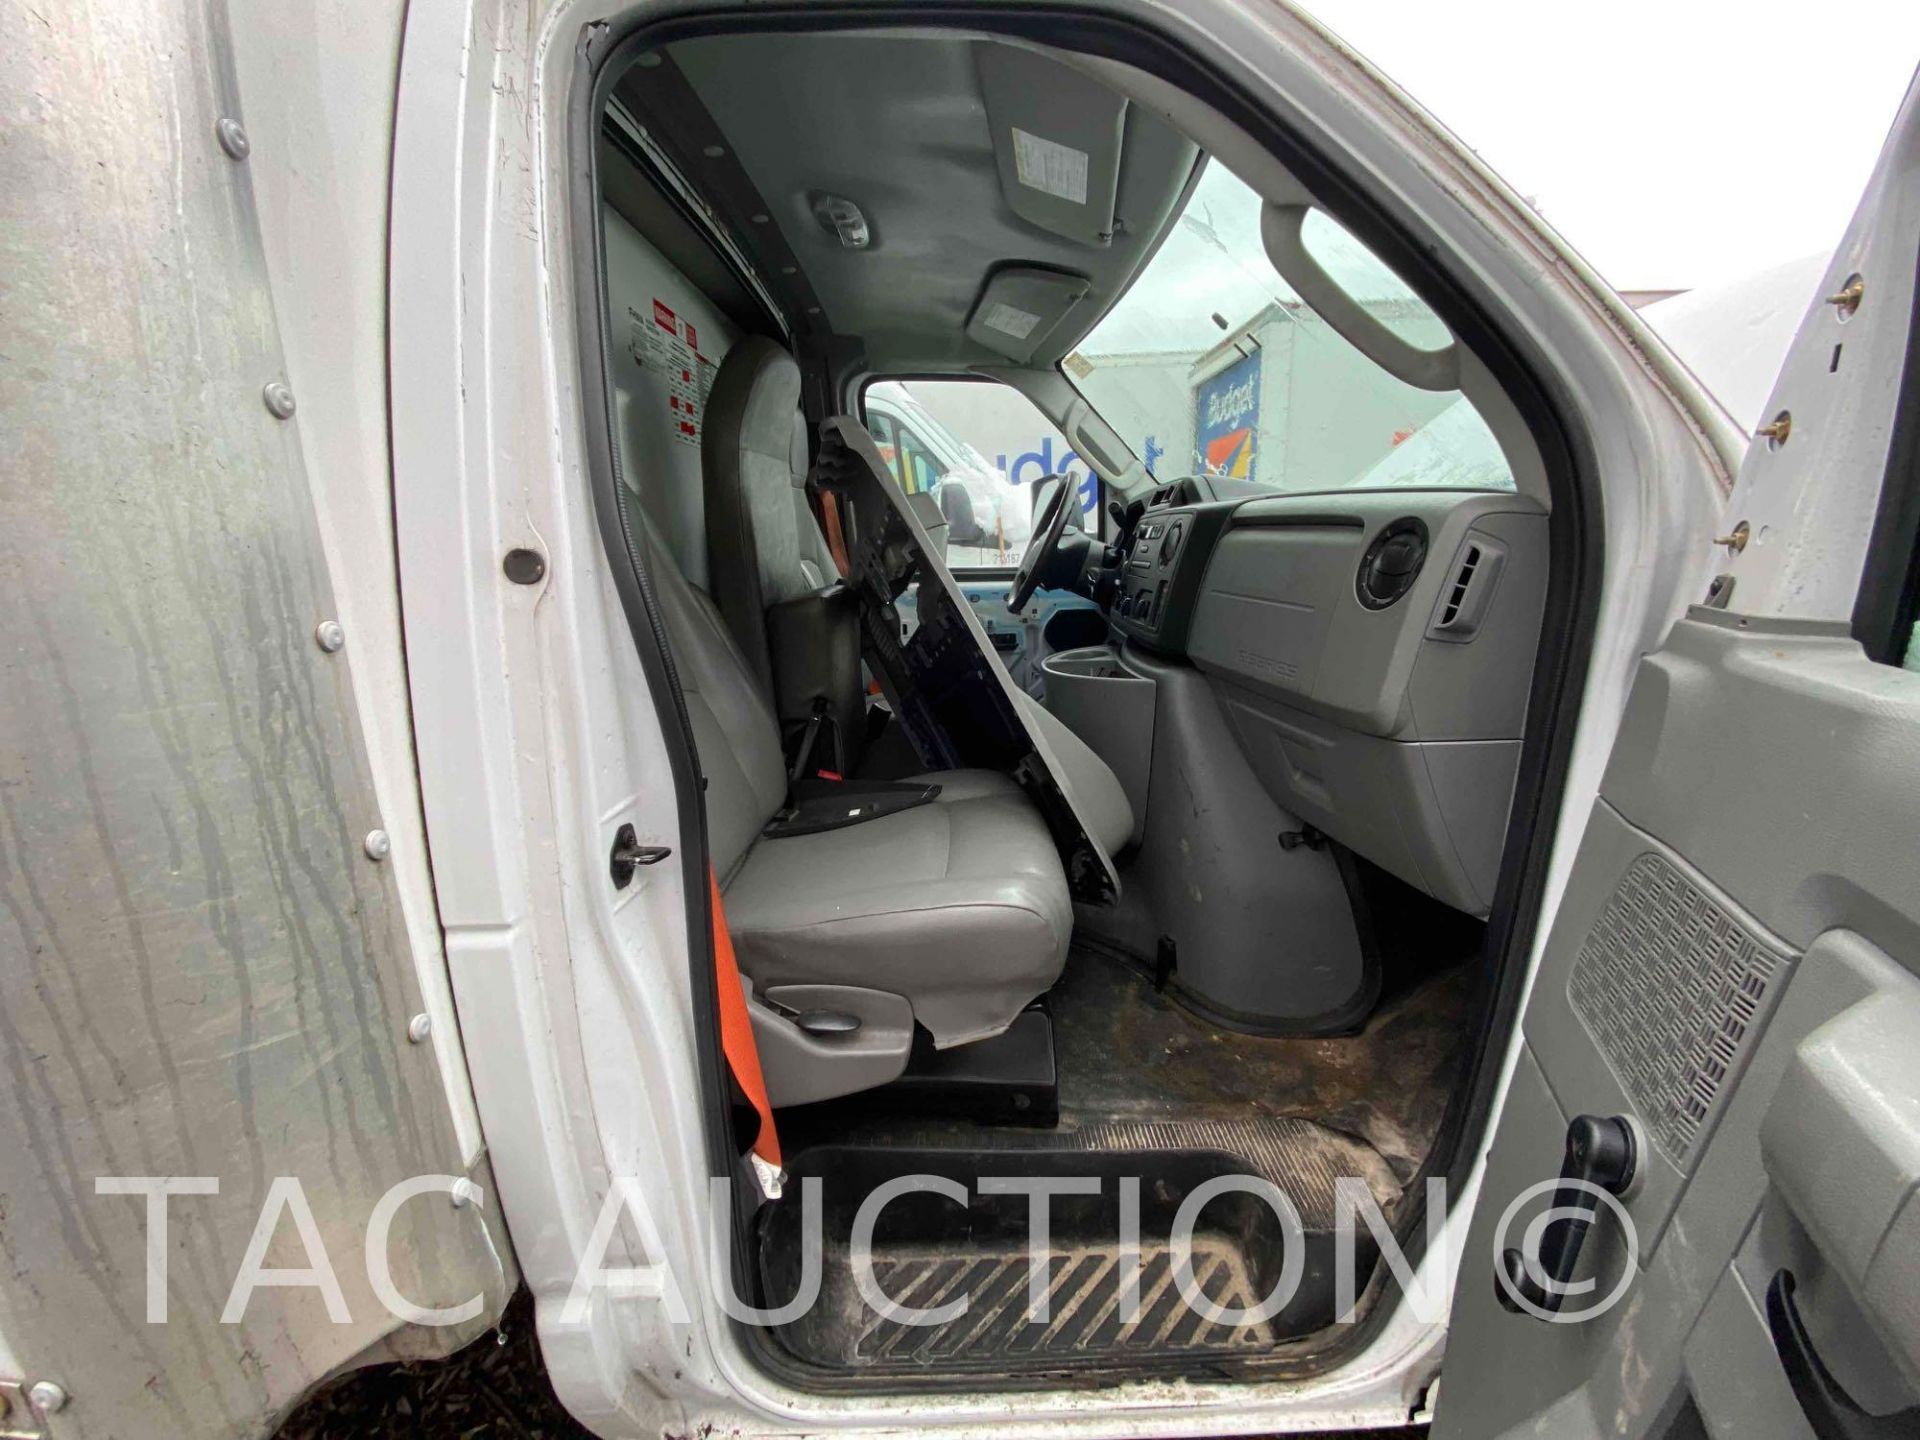 2016 Ford E-350 Box Truck - Image 30 of 48